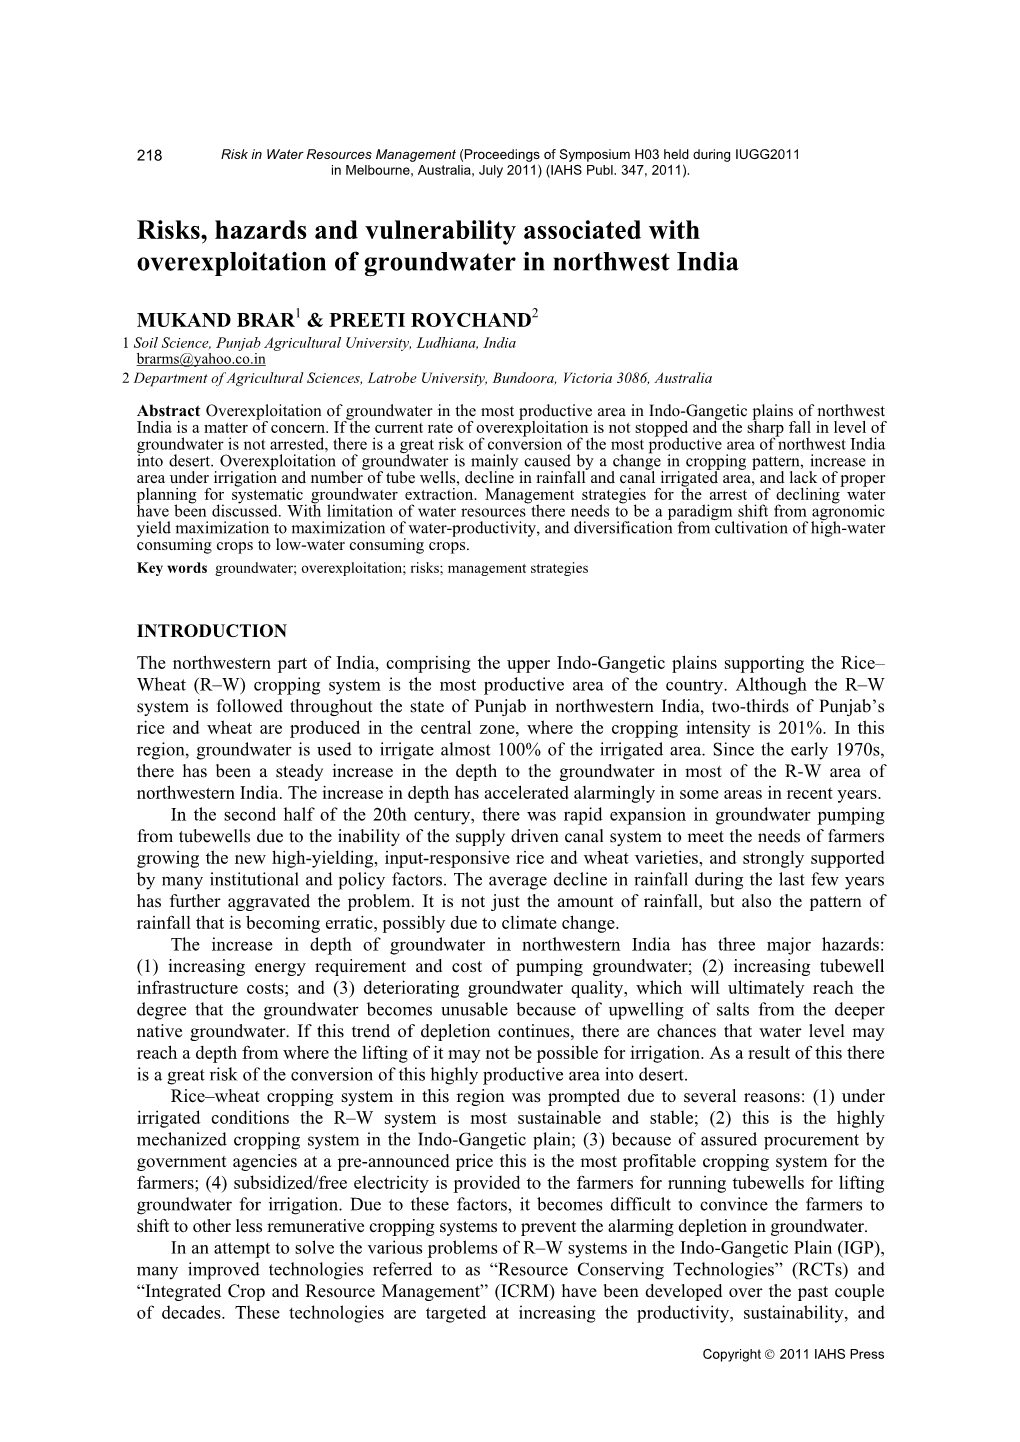 Risks, Hazards and Vulnerability Associated with Overexploitation of Groundwater in Northwest India